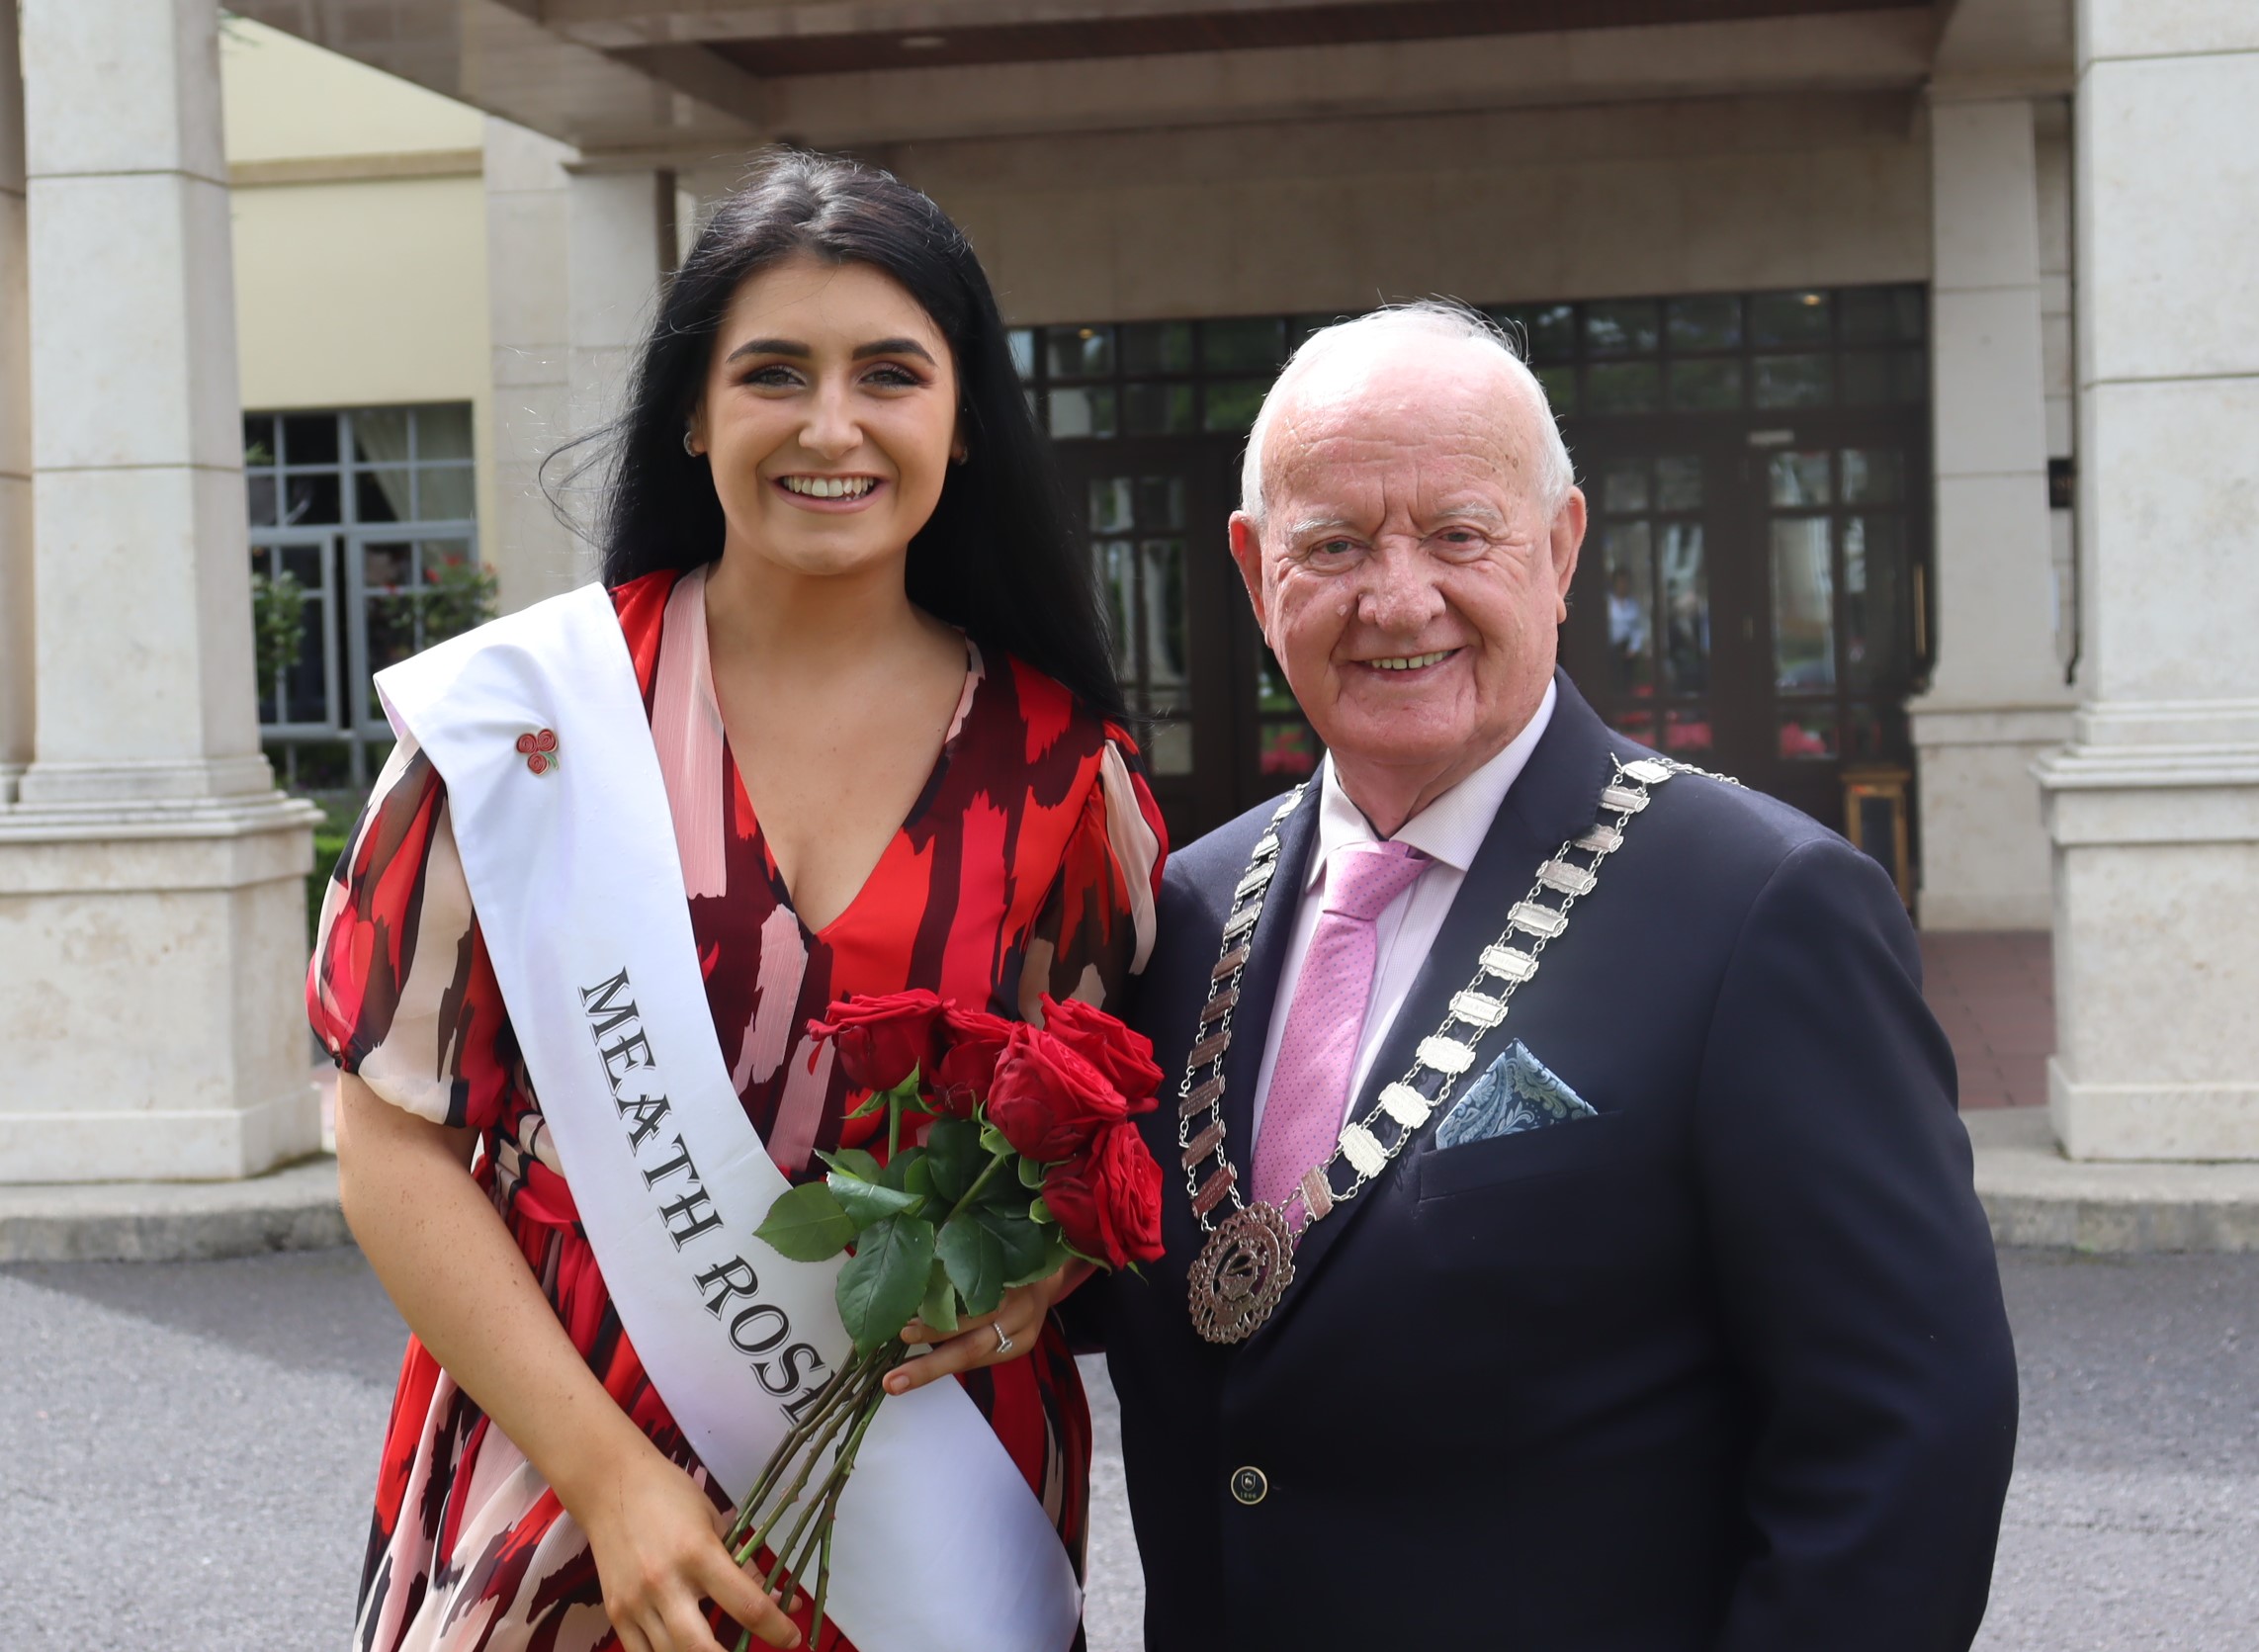 Meath Rose Lane Galvin pictured with Cathaoirleach Cllr. Tommy Reilly